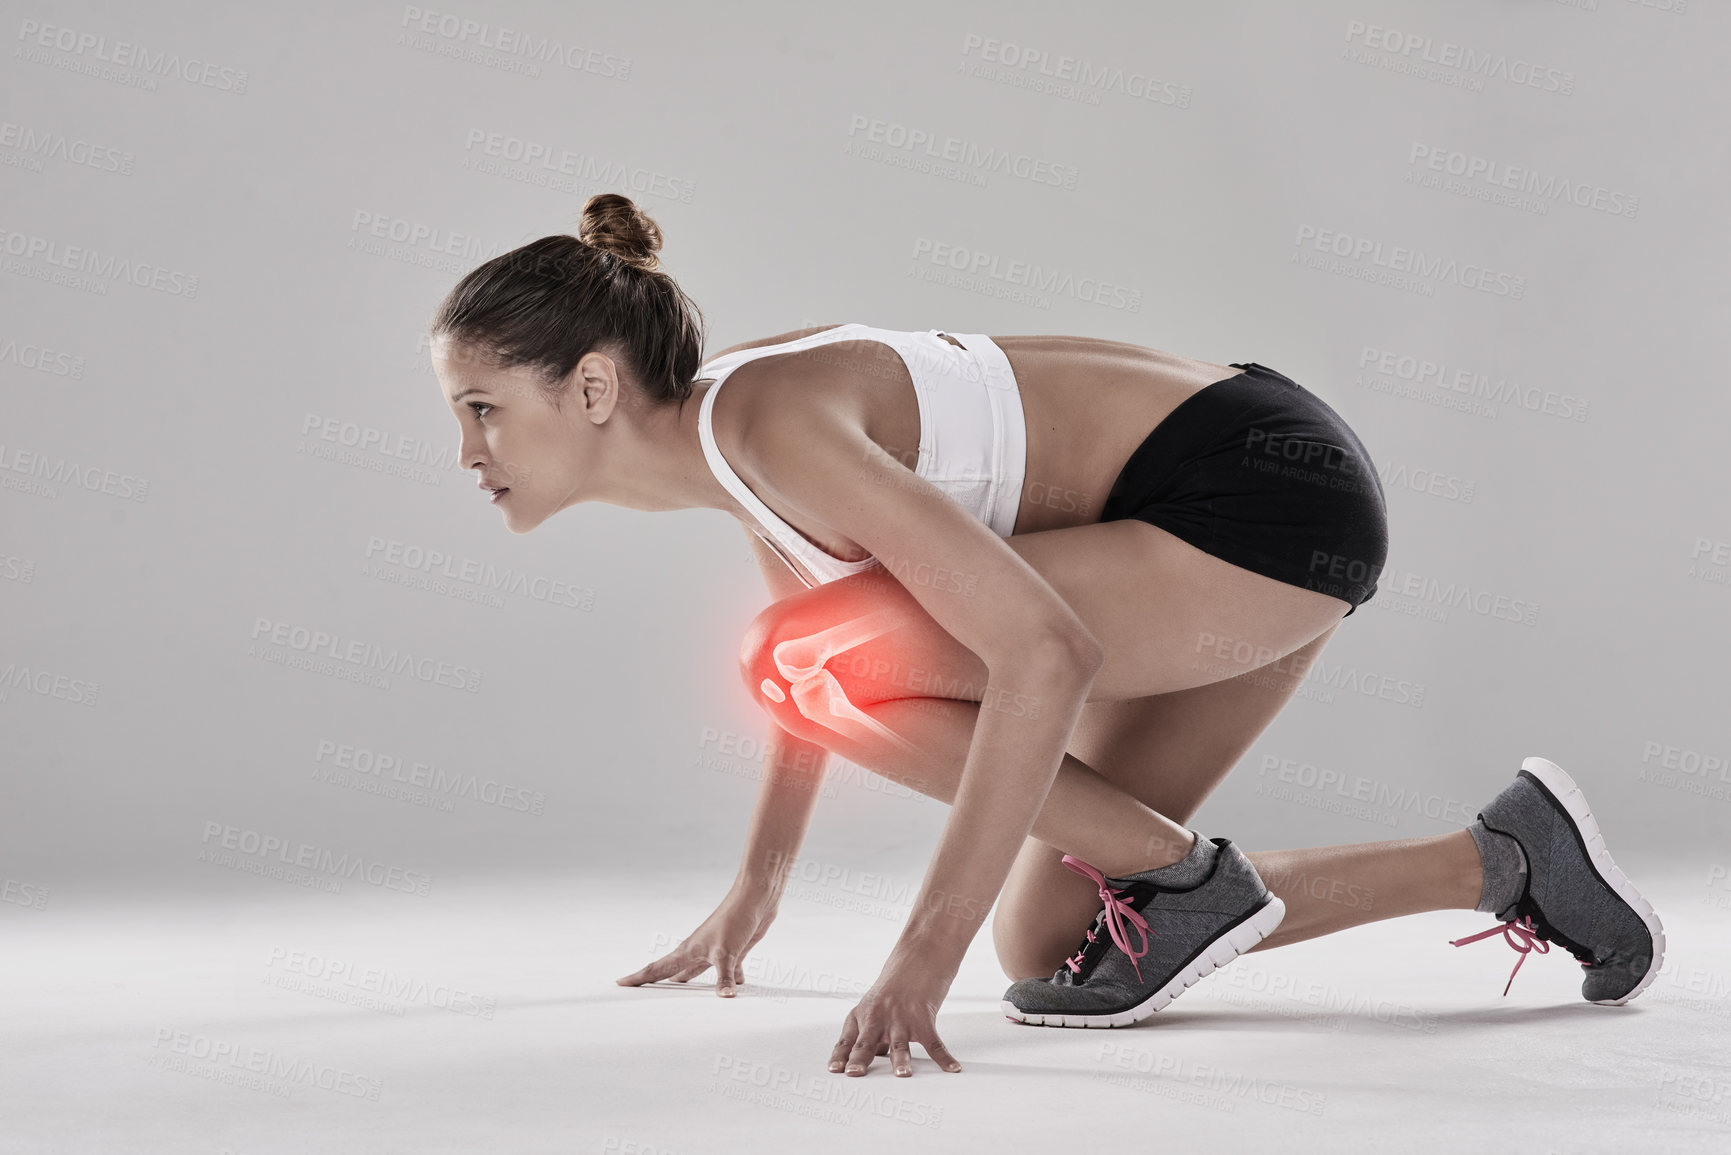 Buy stock photo Studio shot of an athletic young woman ready on her mark against a grey background